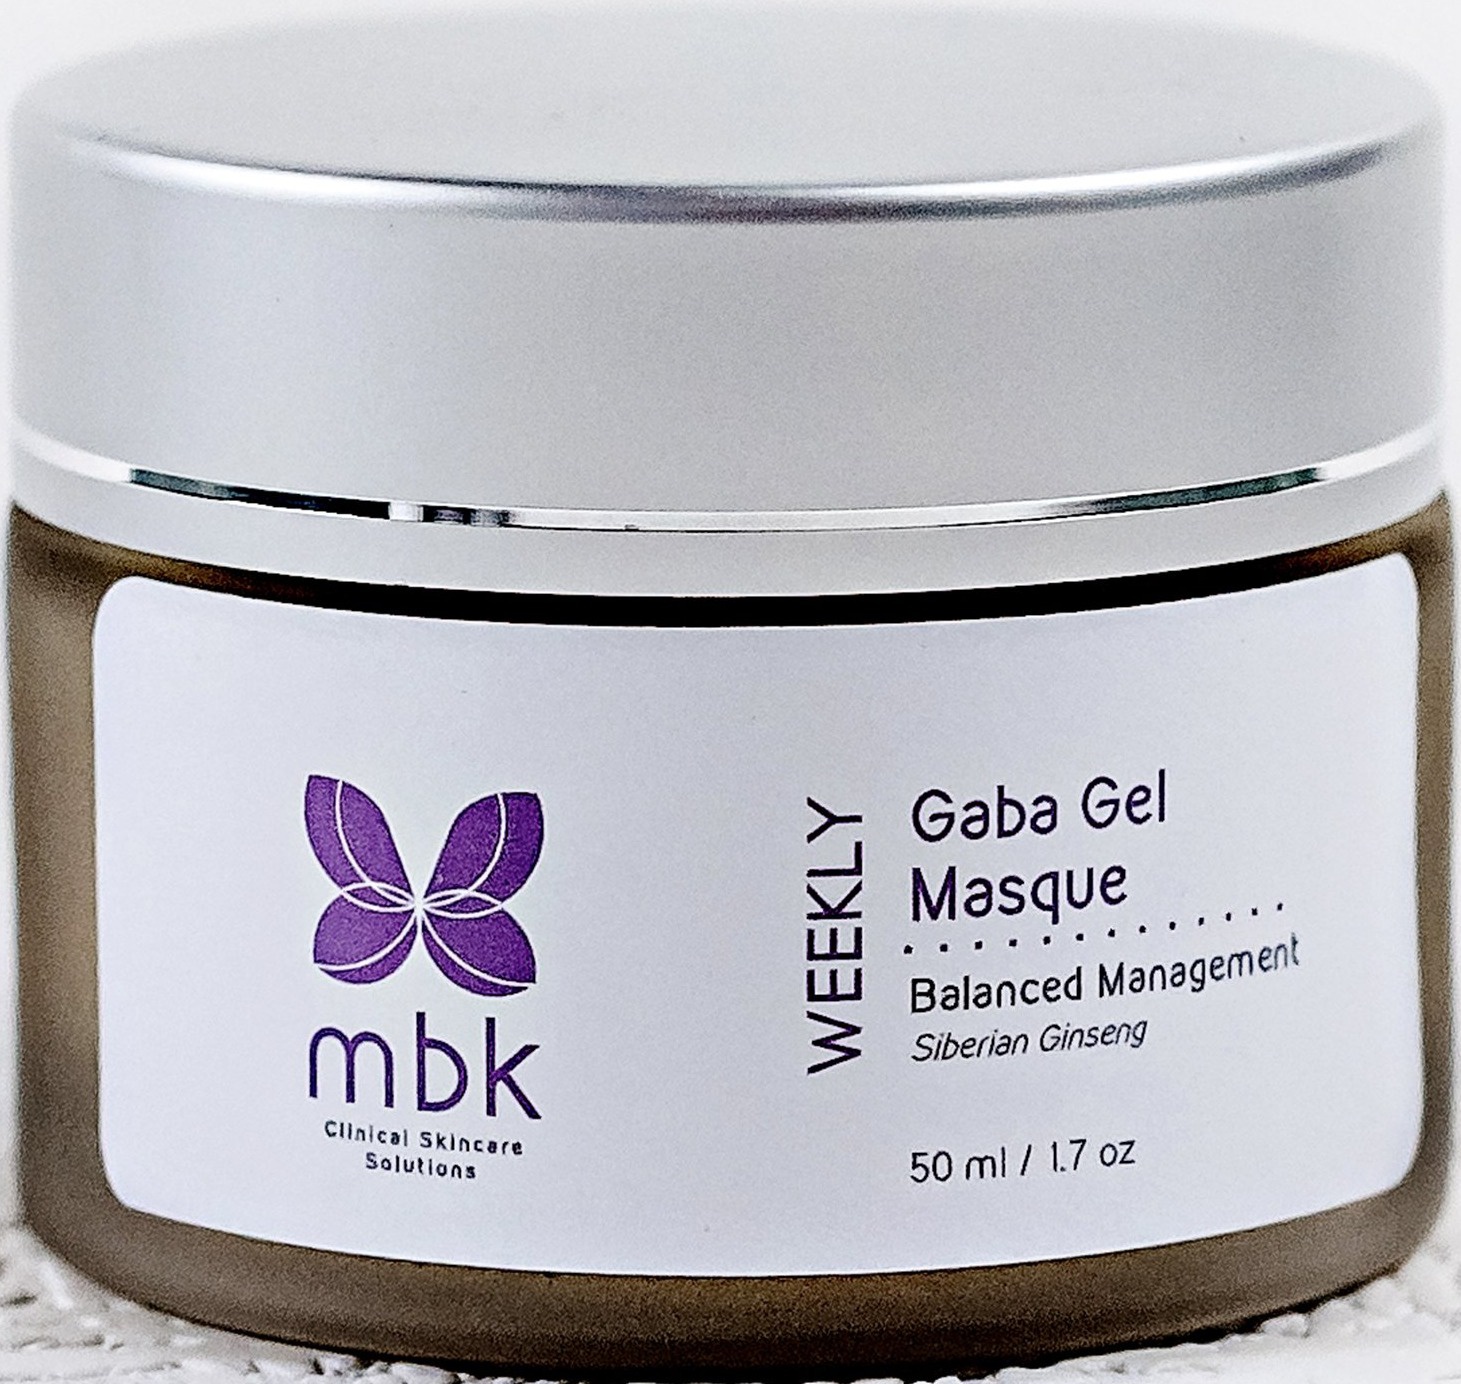 MBK Clinical Skincare Solutions Gaba Gel Masque